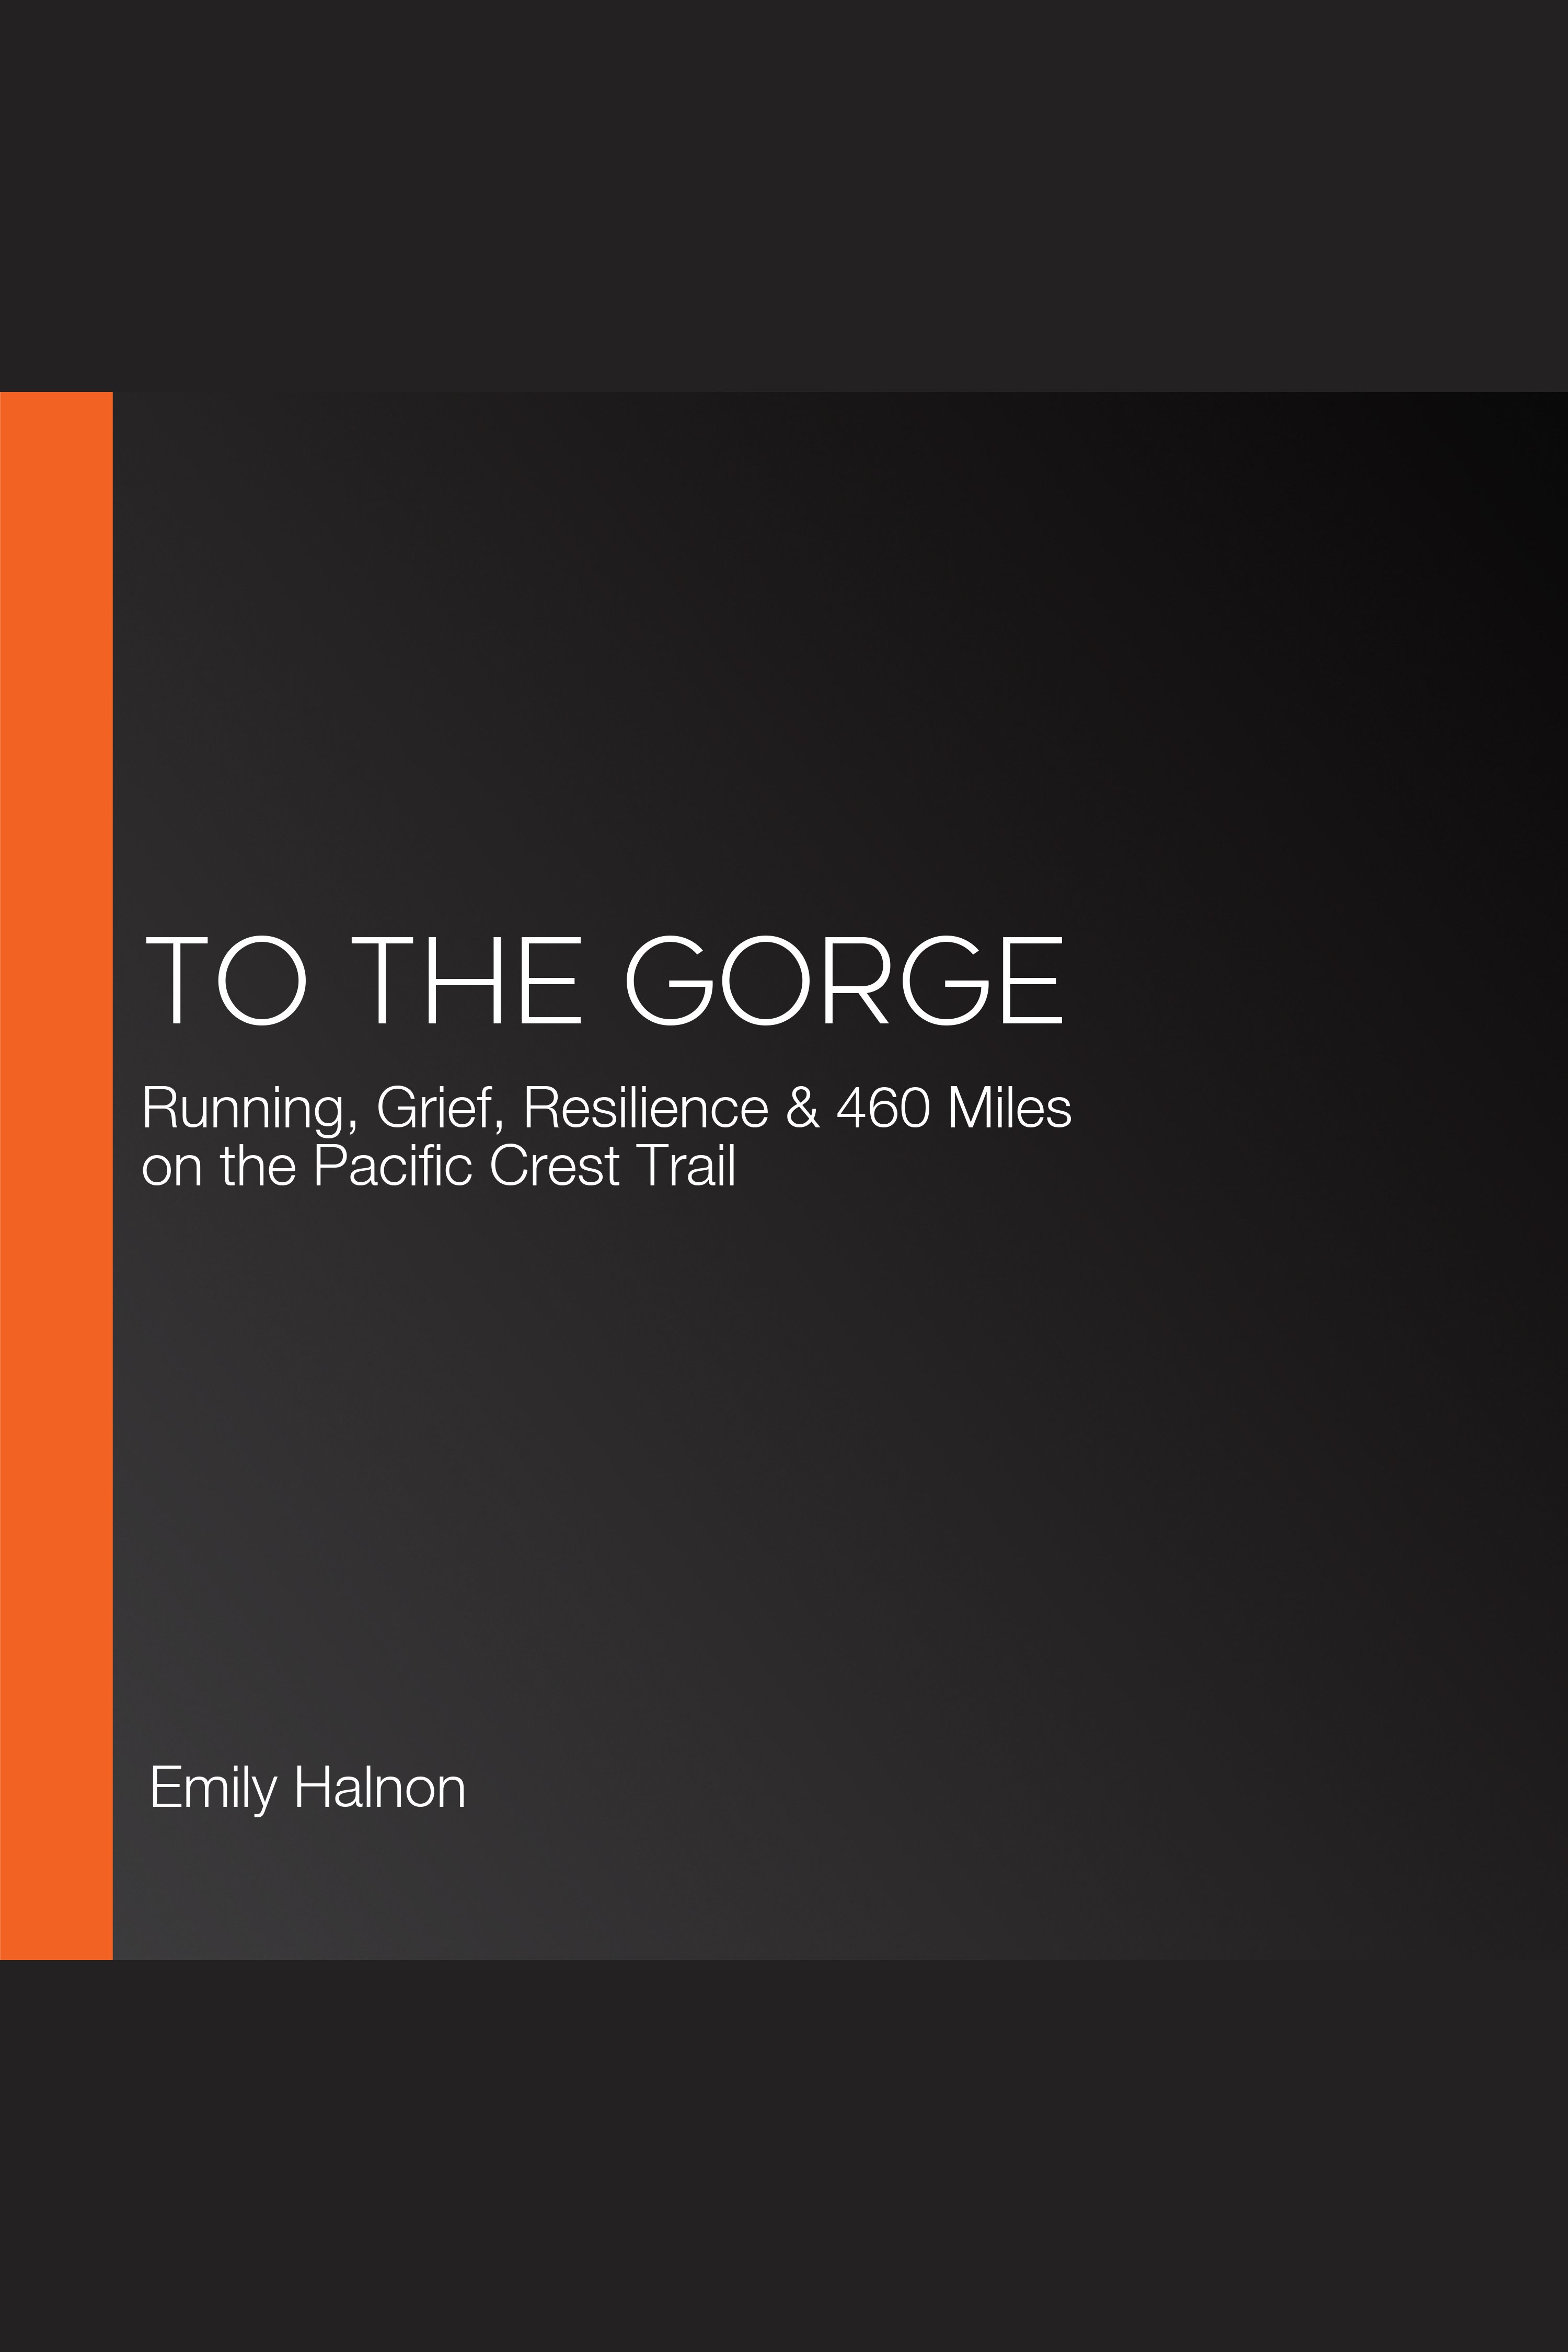 To the Gorge Running, Grief, Resilience & 460 Miles on the Pacific Crest Trail cover image